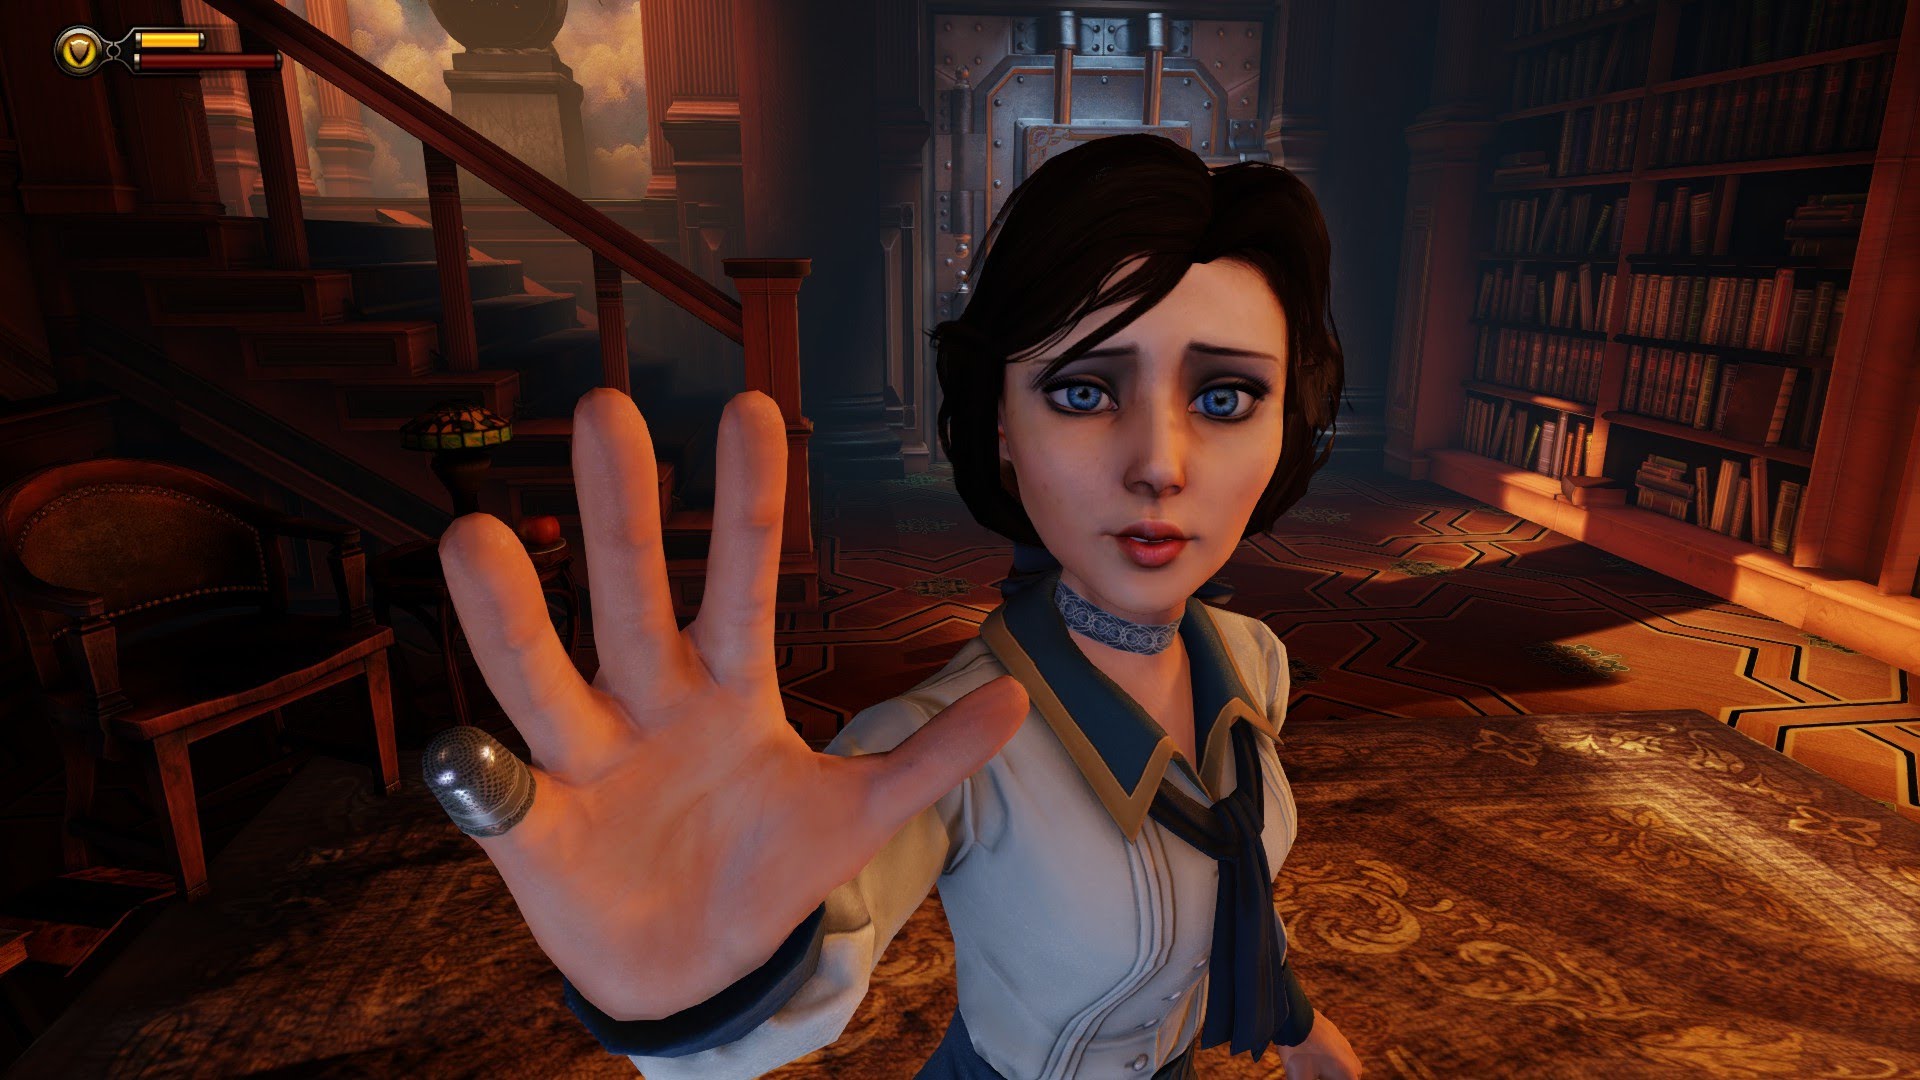 (c) Irrational Games